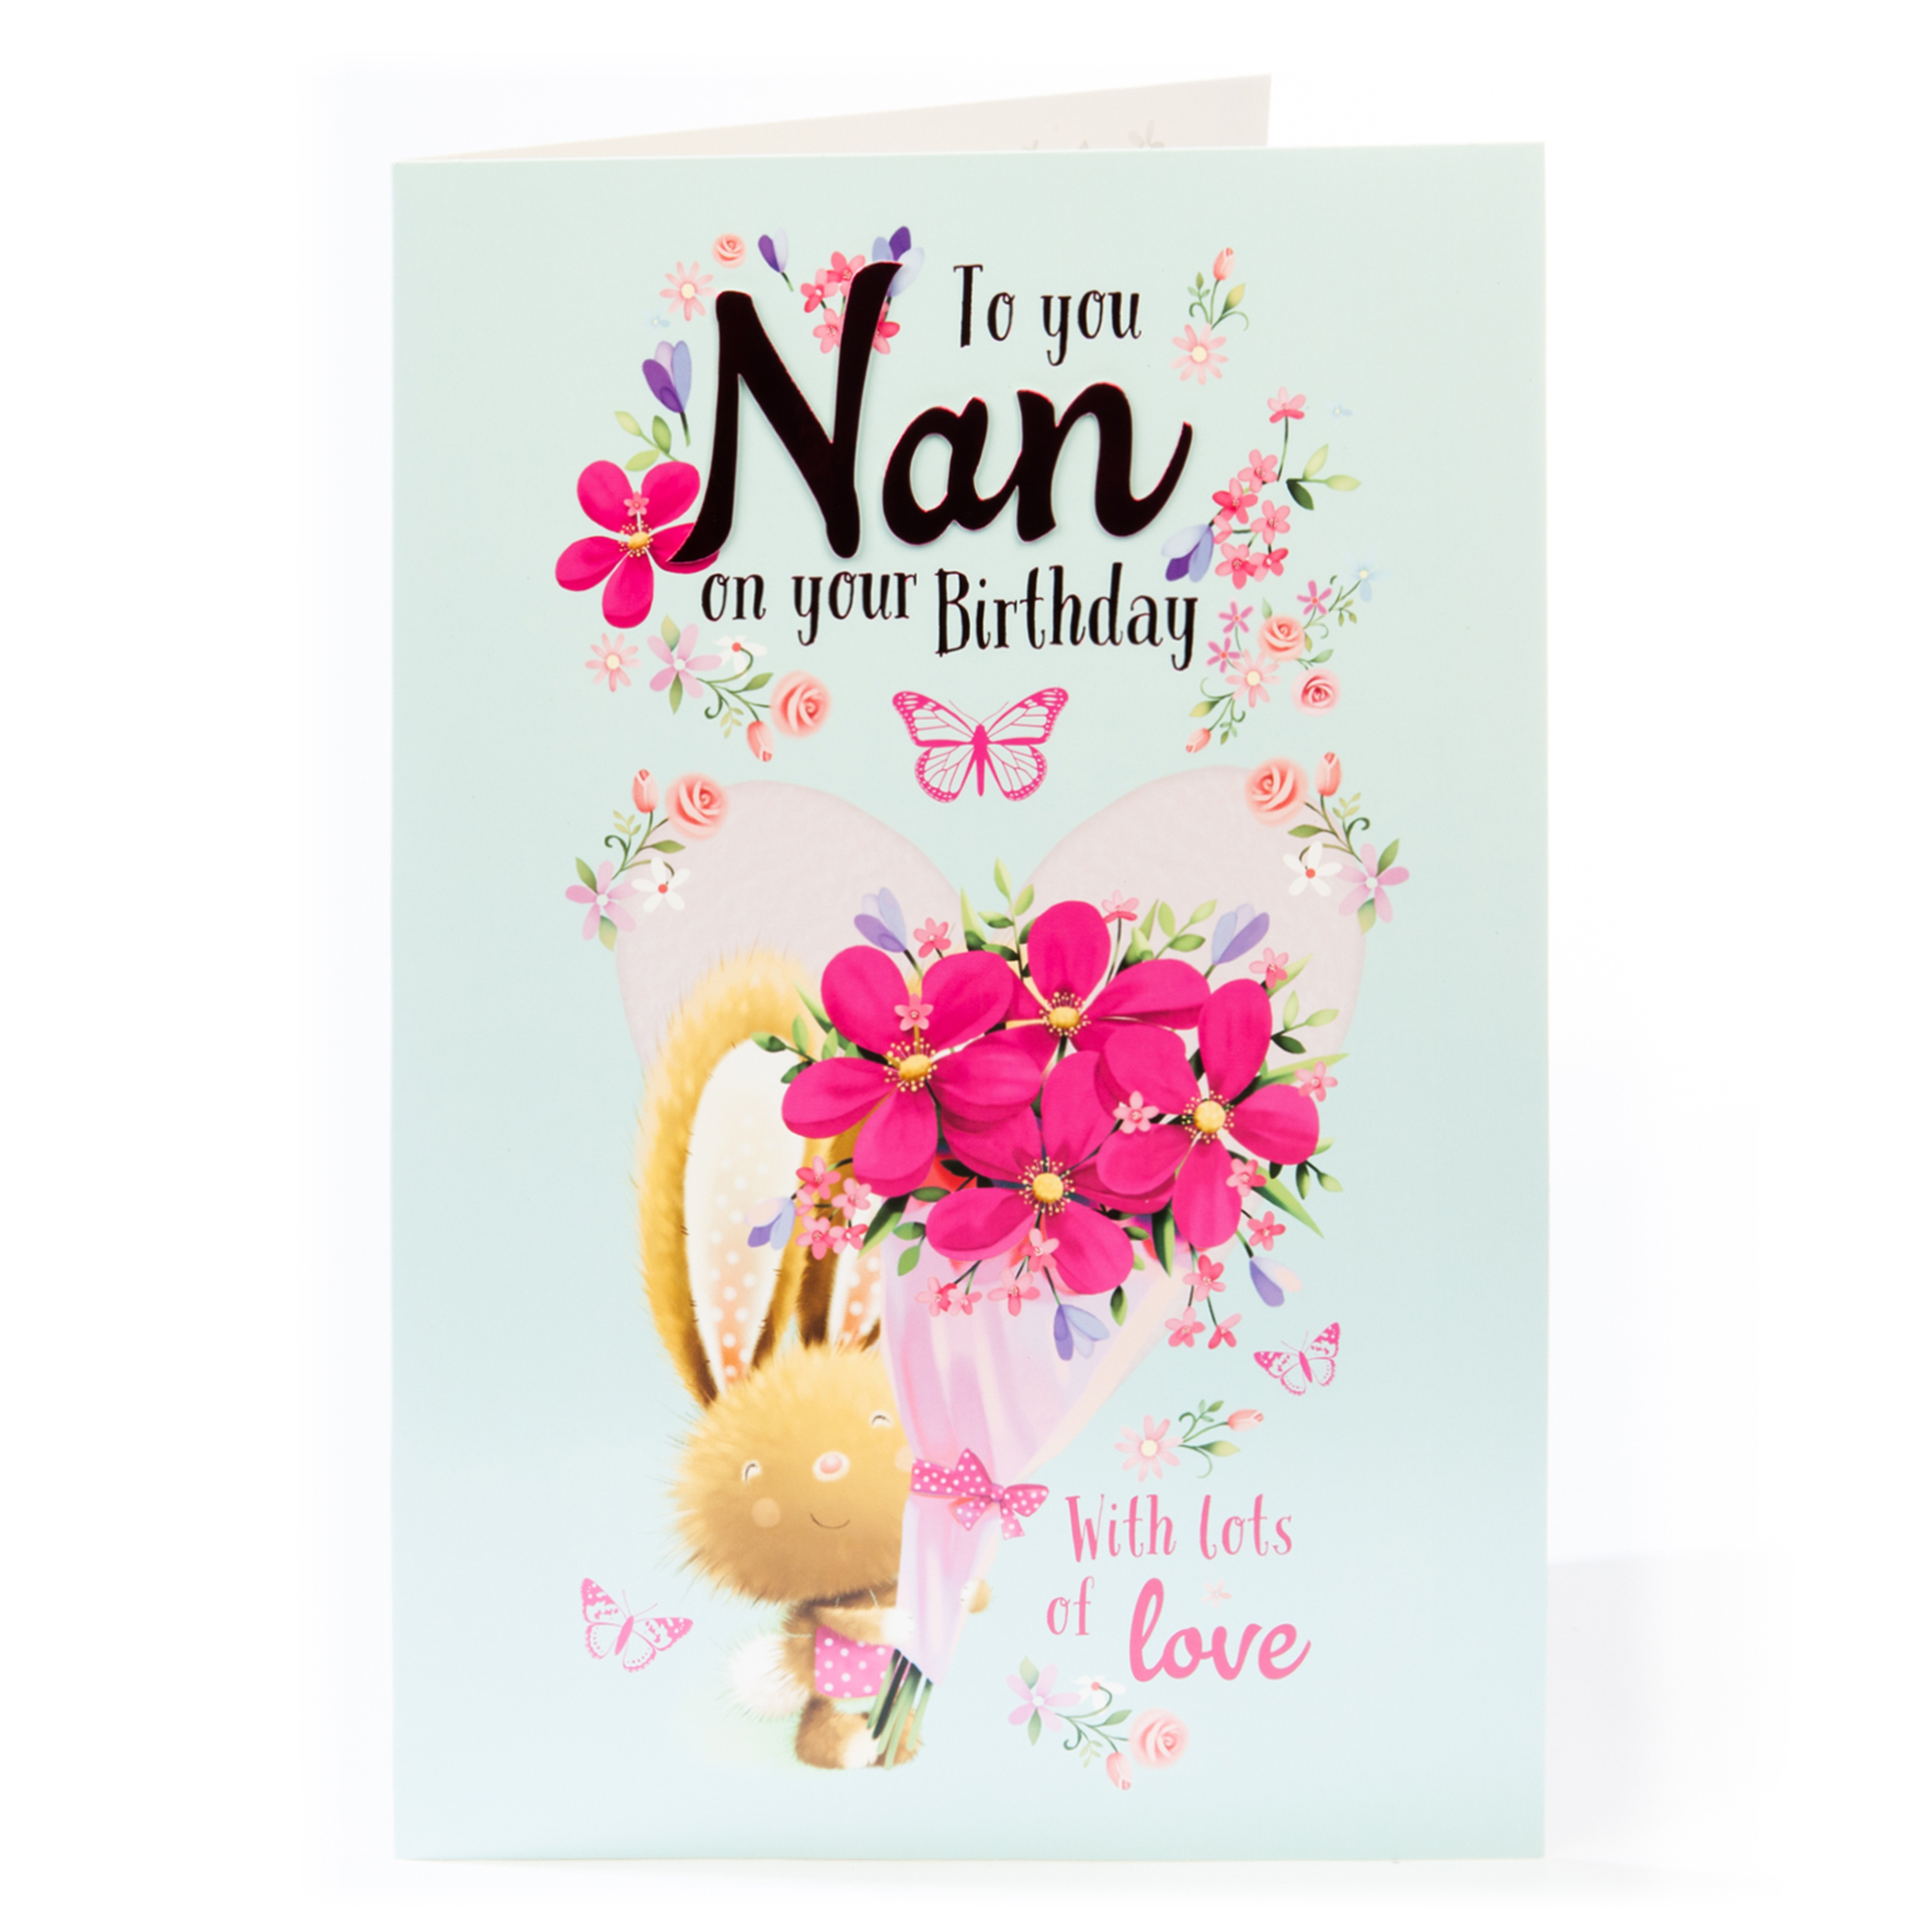 Giant Birthday Card - Nan With Lots Of Love